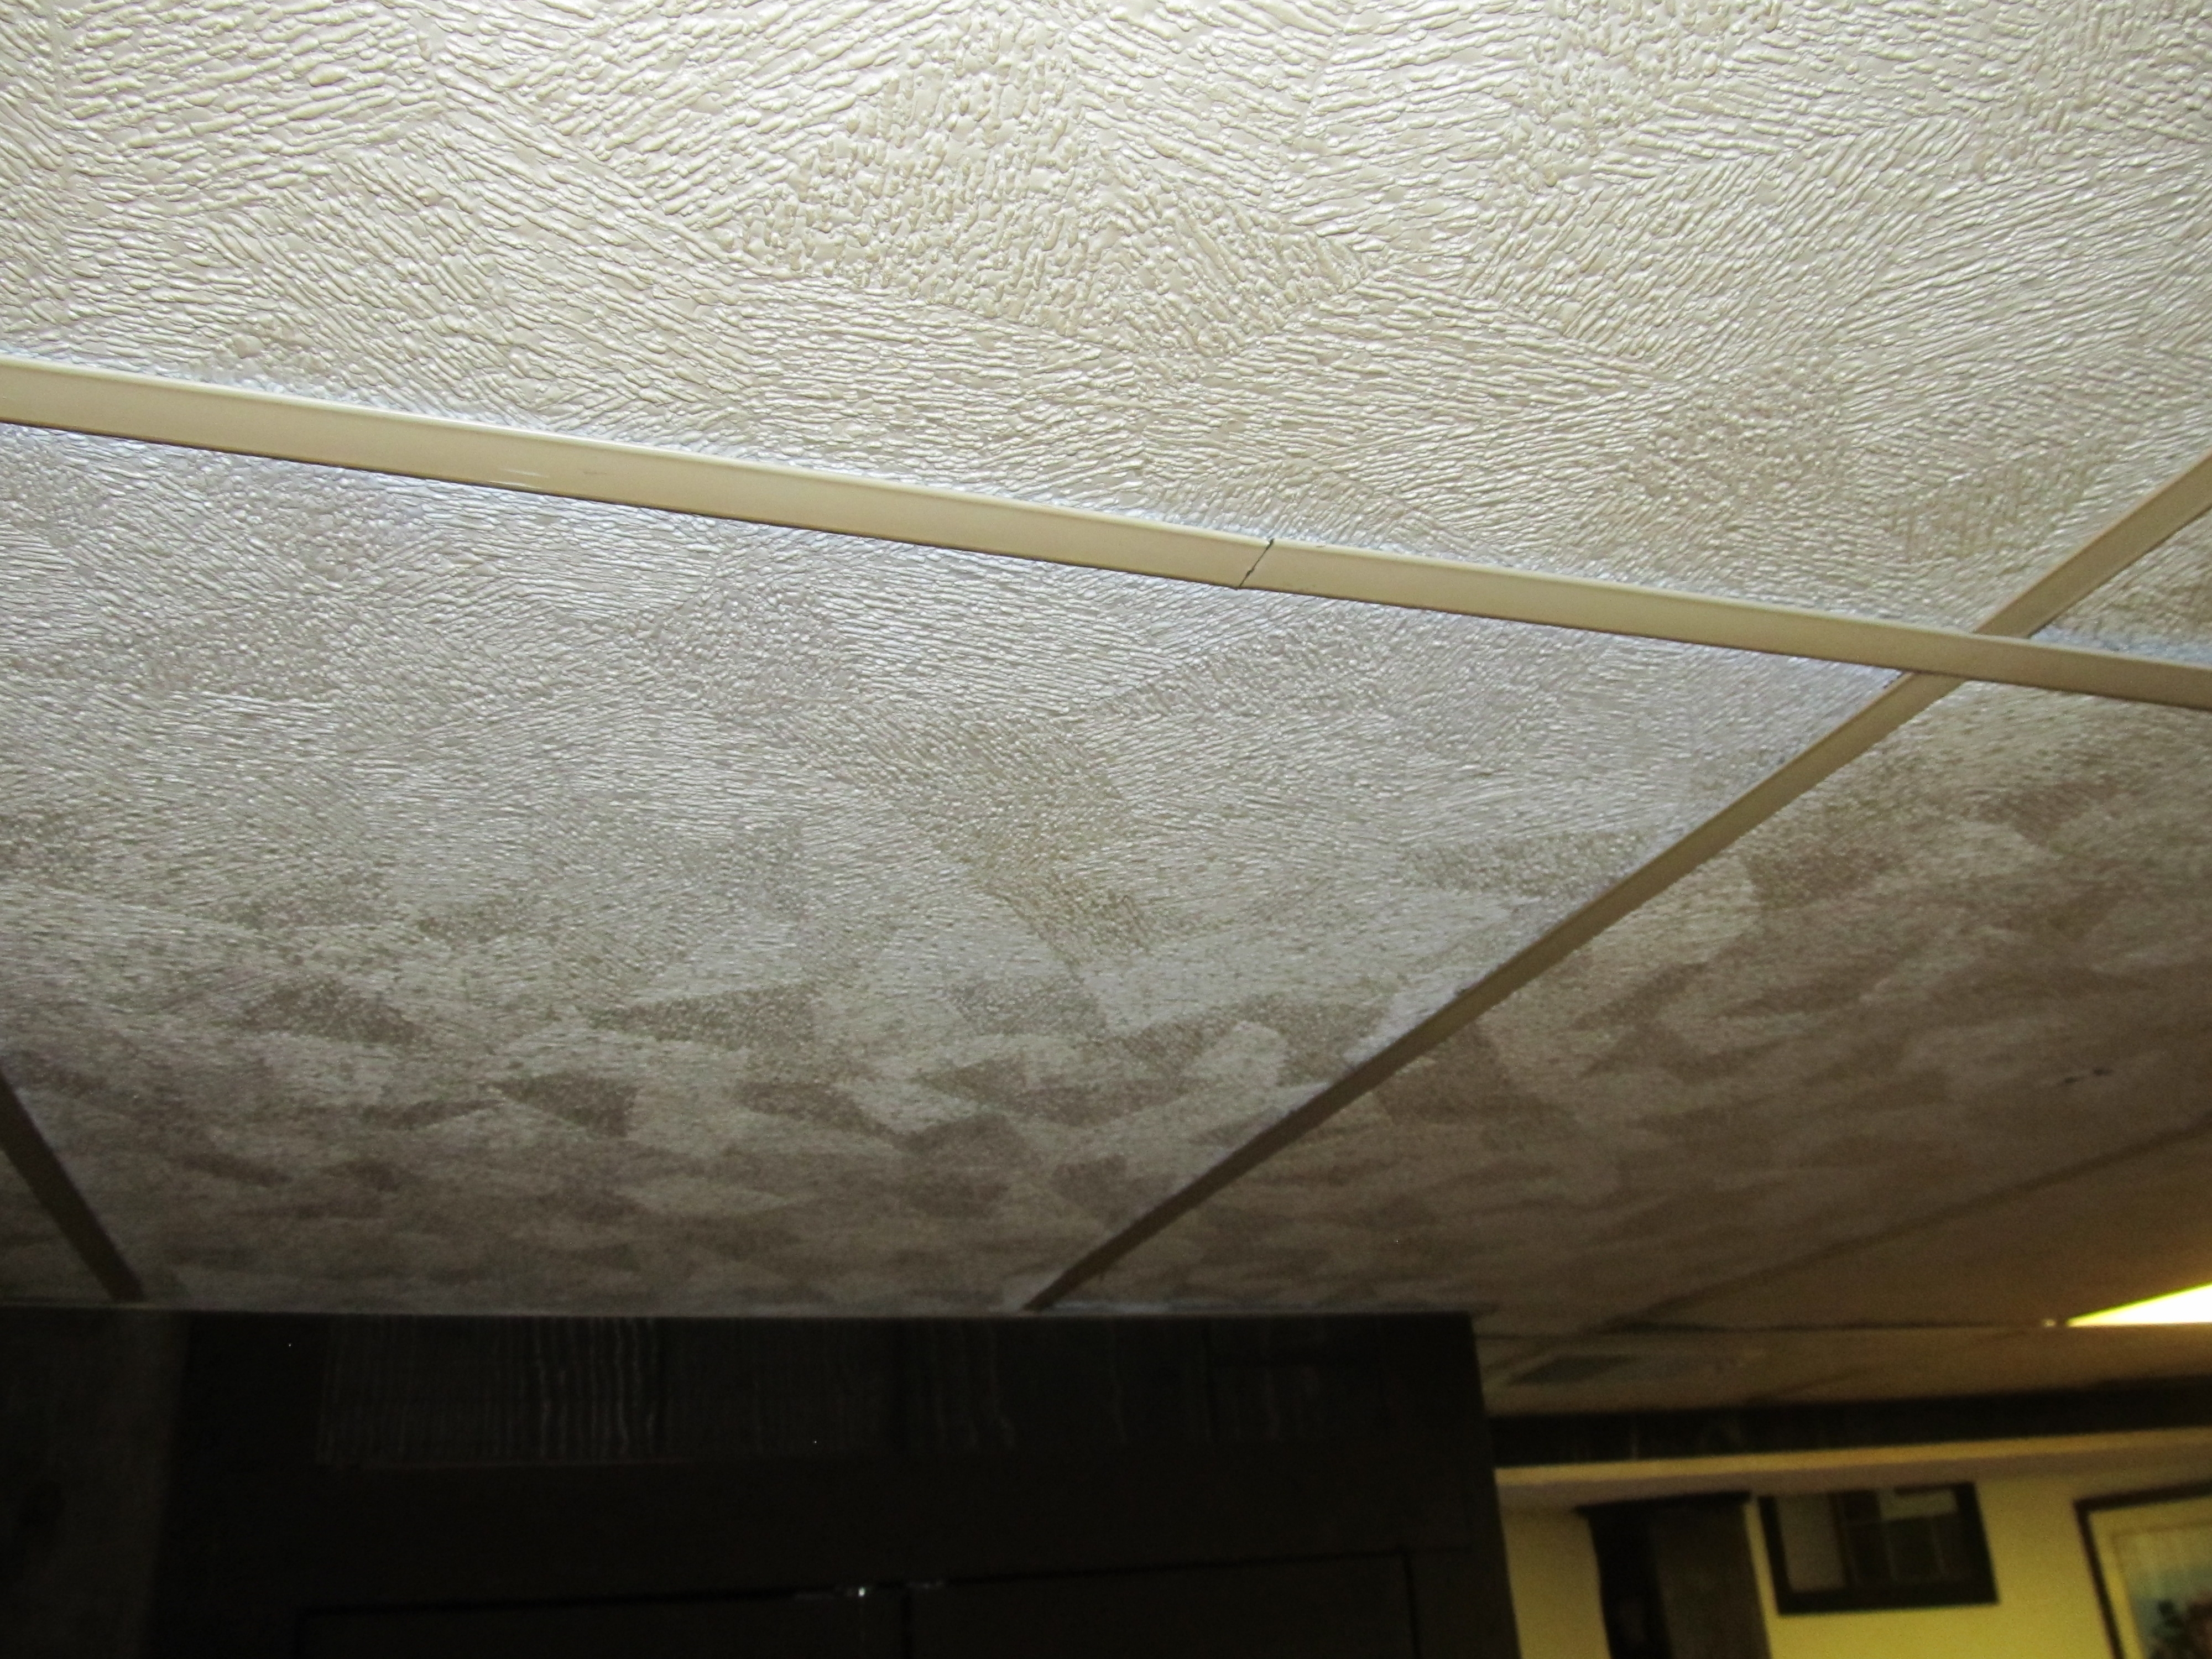 Permalink to Covering Drop Ceiling Tiles